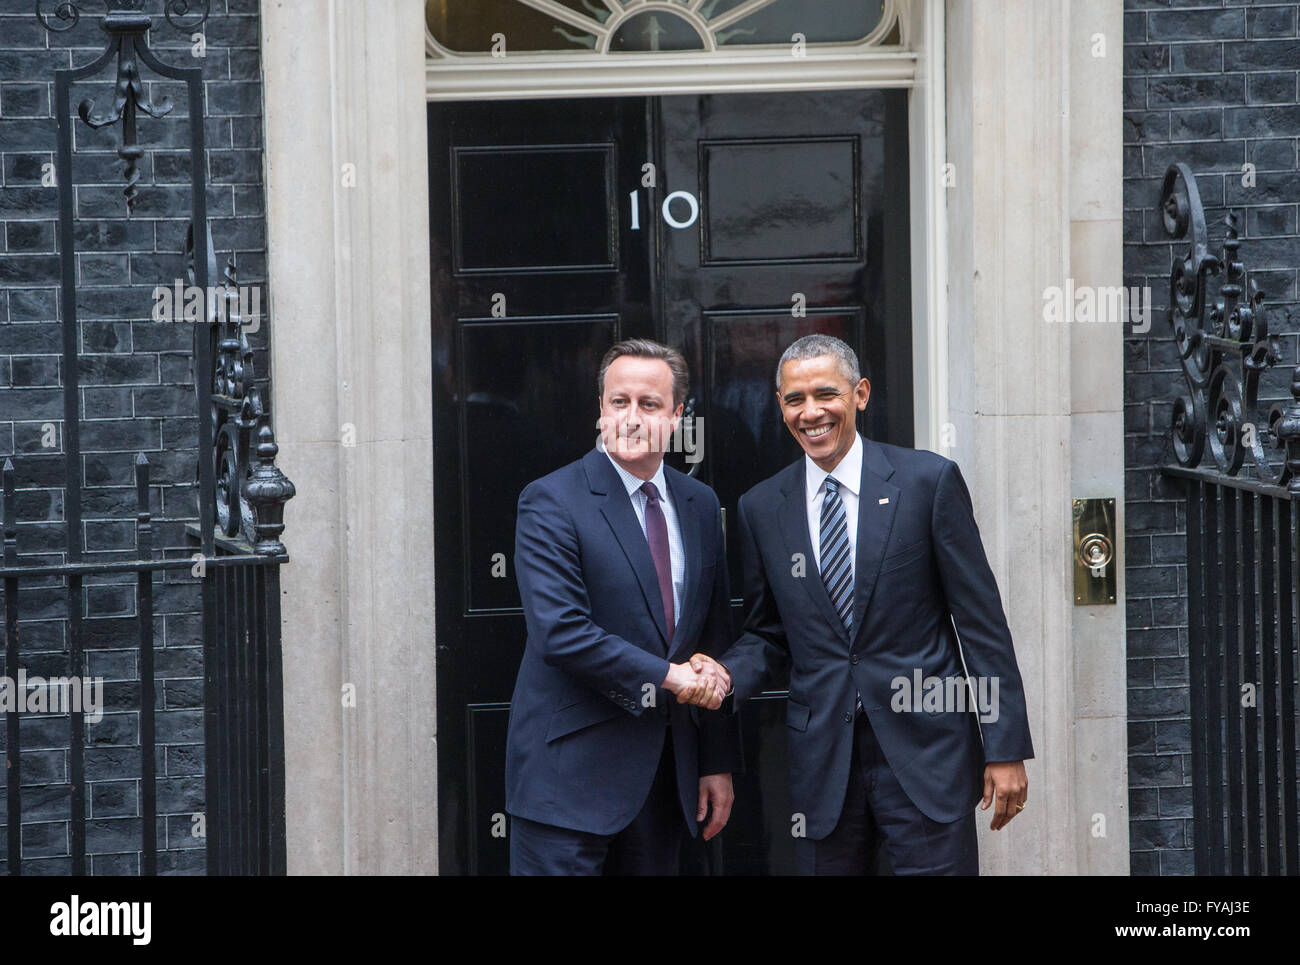 President Obama arrives at 10 Downing Street for talks with Prime Minister David Cameron who greets him Stock Photo